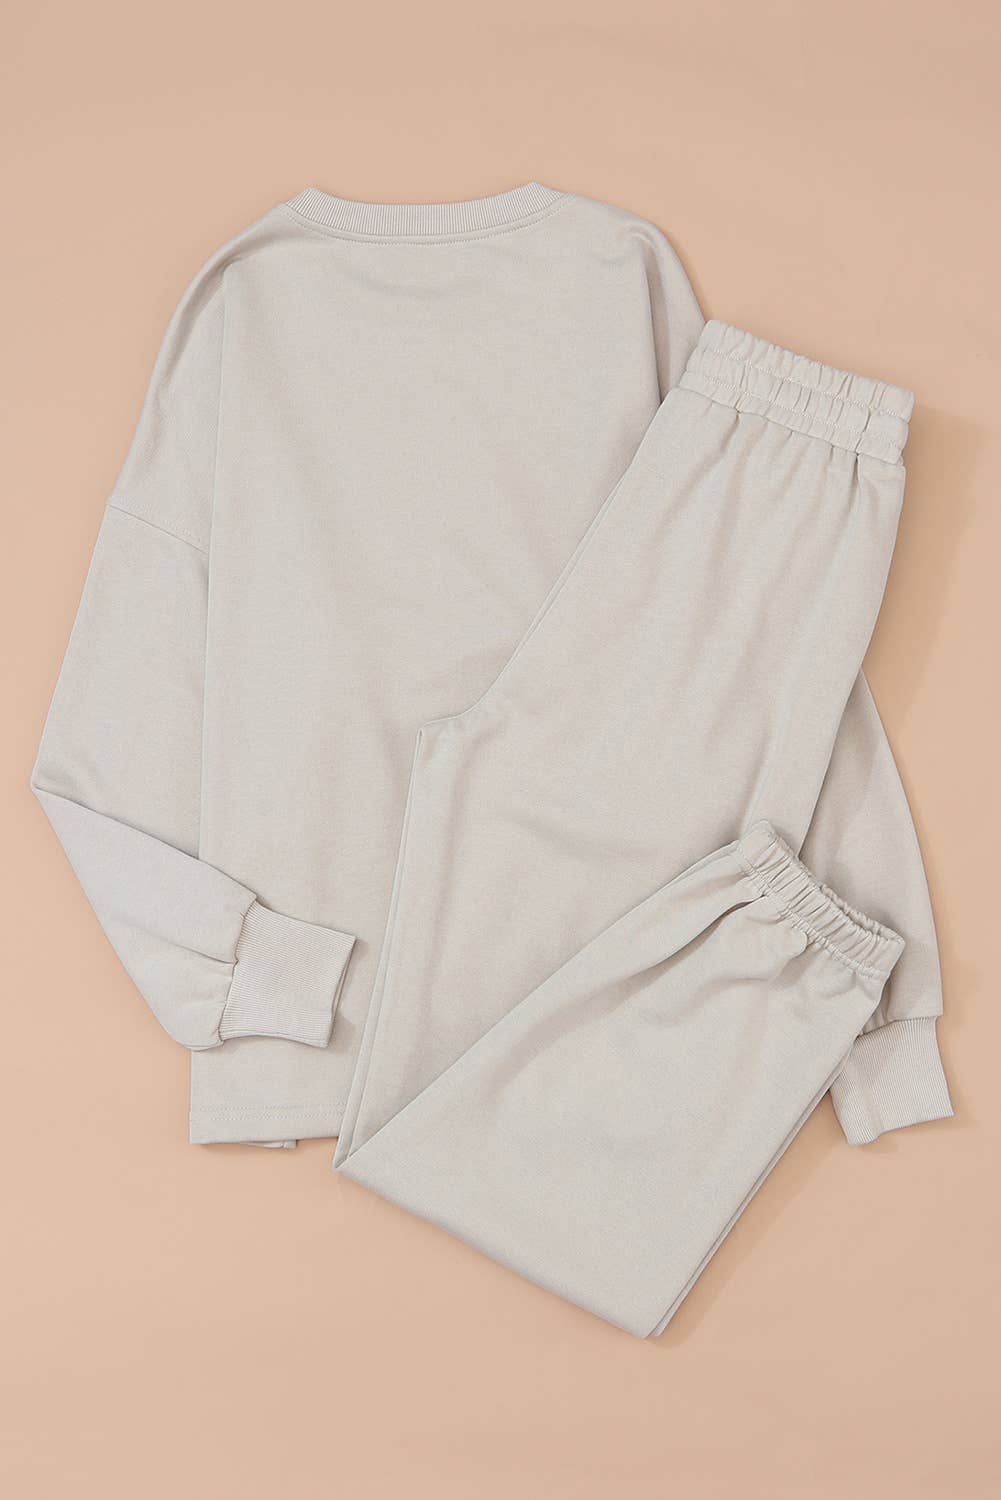 Long Sleeve Top and Drawstring Pants Lounge Outfit - Beige